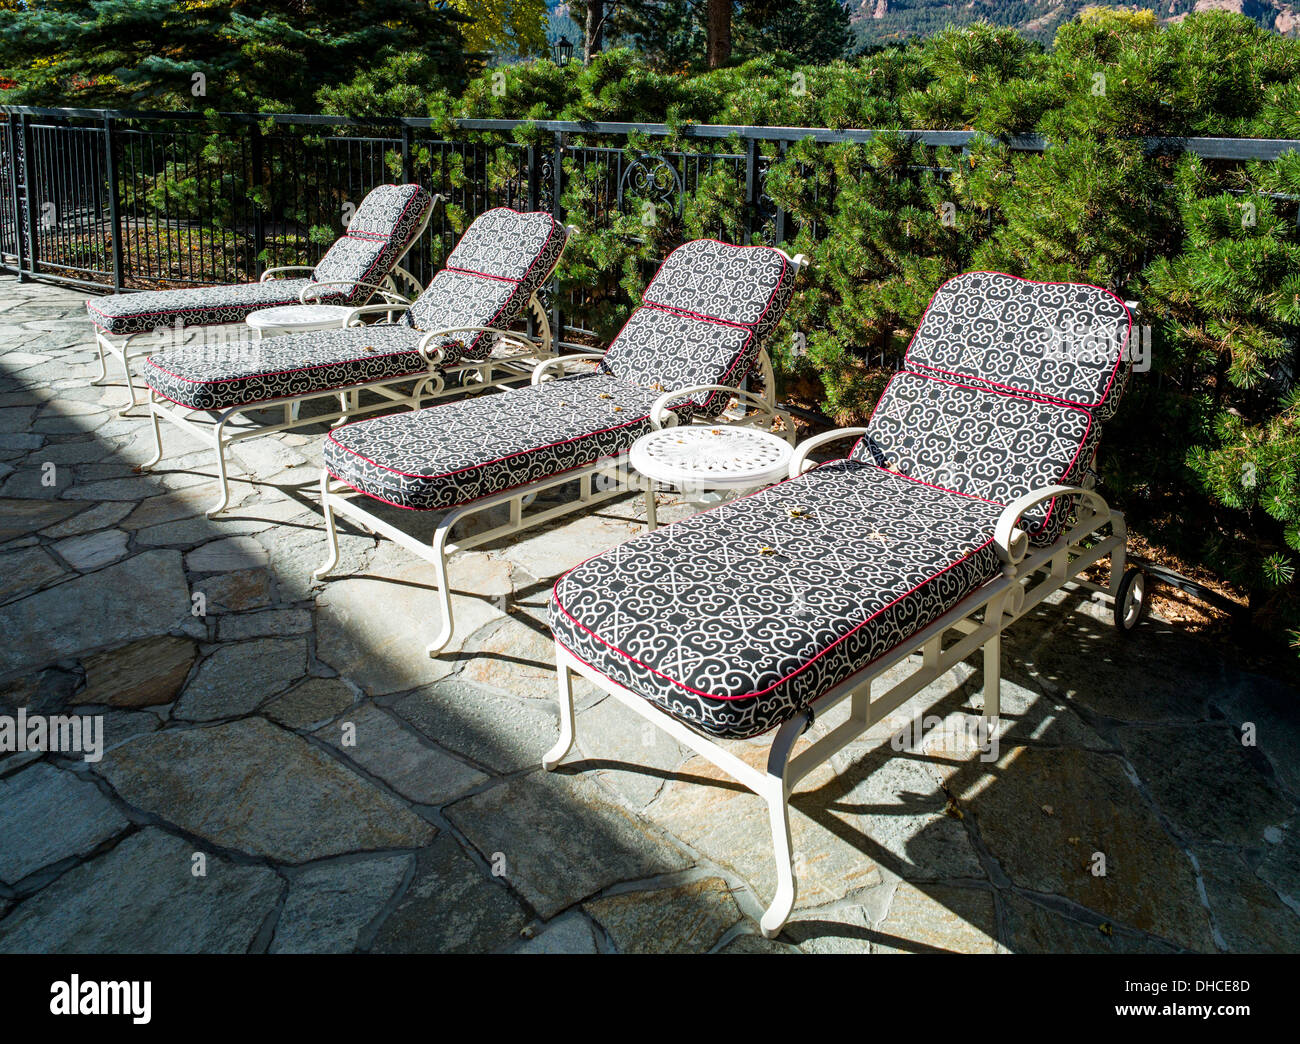 Chaise lounge chairs line a swimming pool, The Broadmoor, historic luxury hotel and resort, Colorado Springs, Colorado, USA Stock Photo